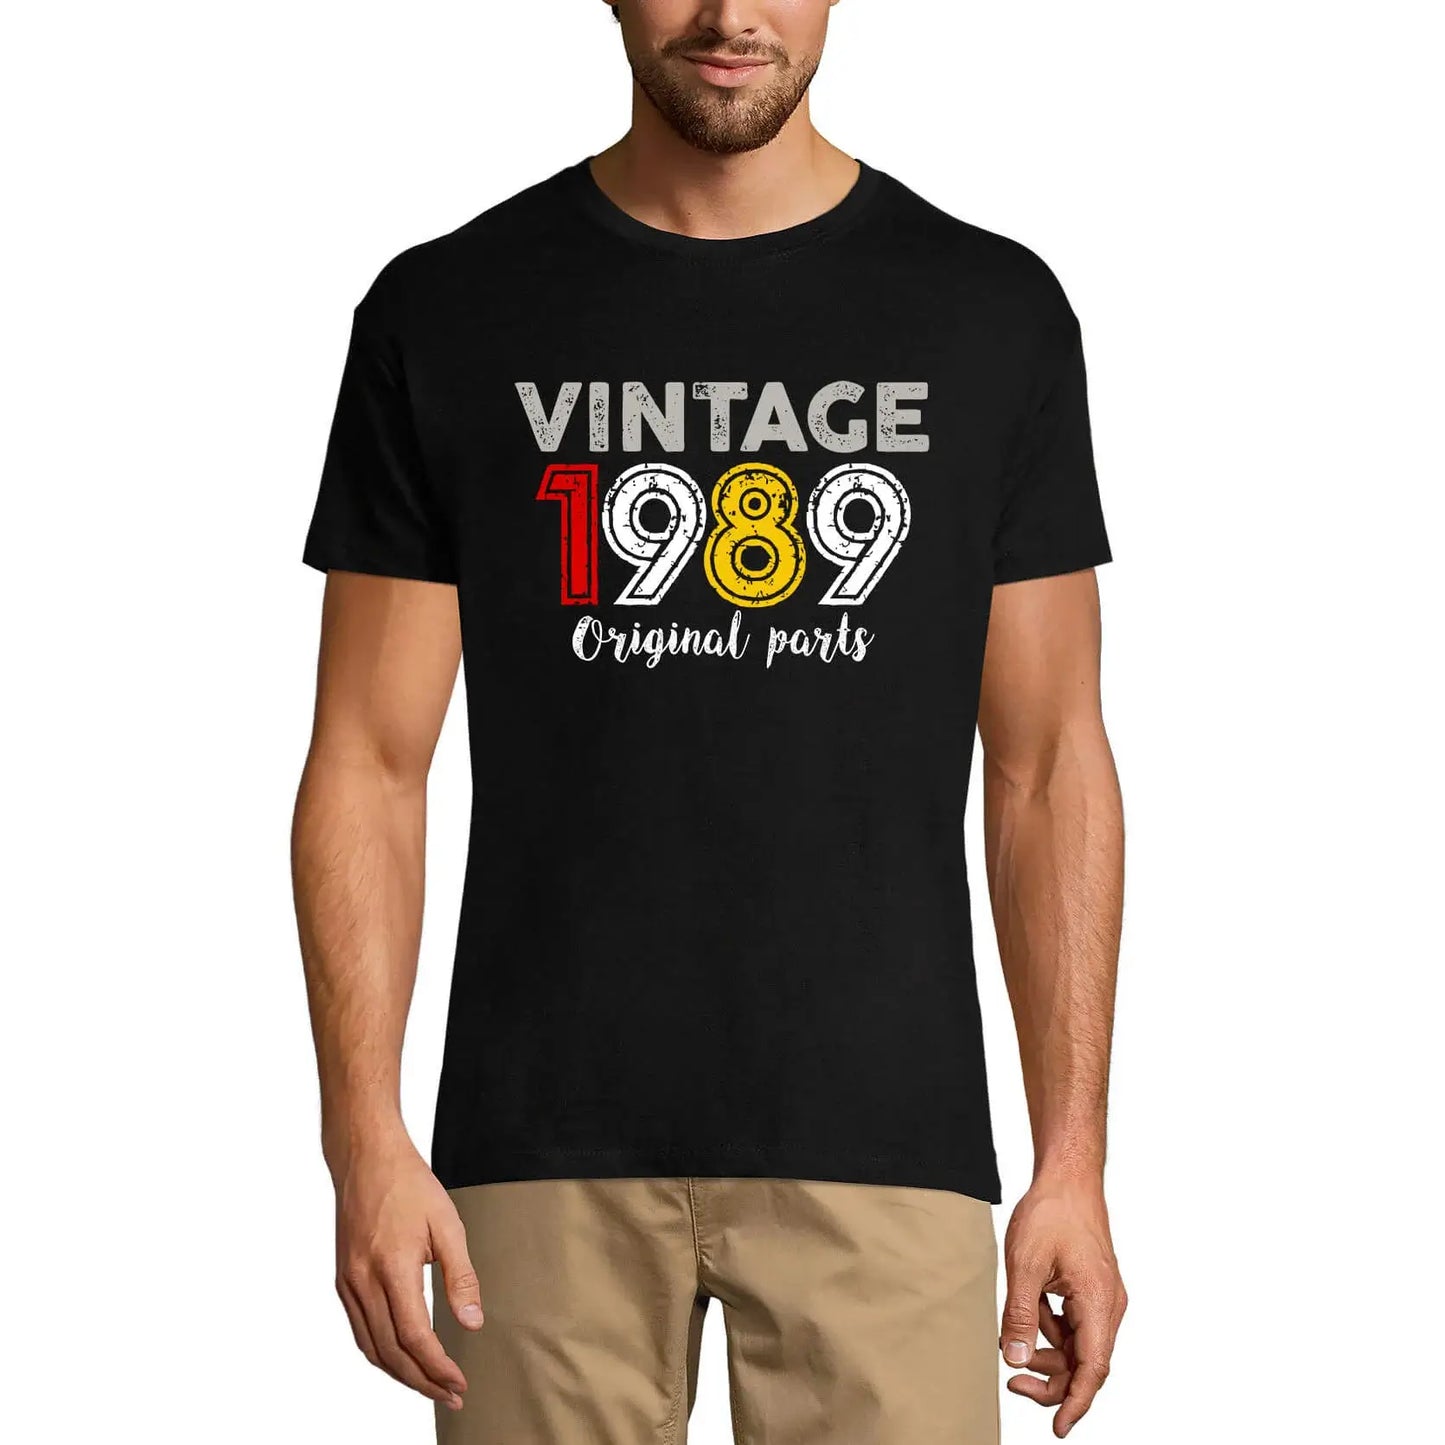 Men's Graphic T-Shirt Original Parts 1989 35th Birthday Anniversary 35 Year Old Gift 1989 Vintage Eco-Friendly Short Sleeve Novelty Tee